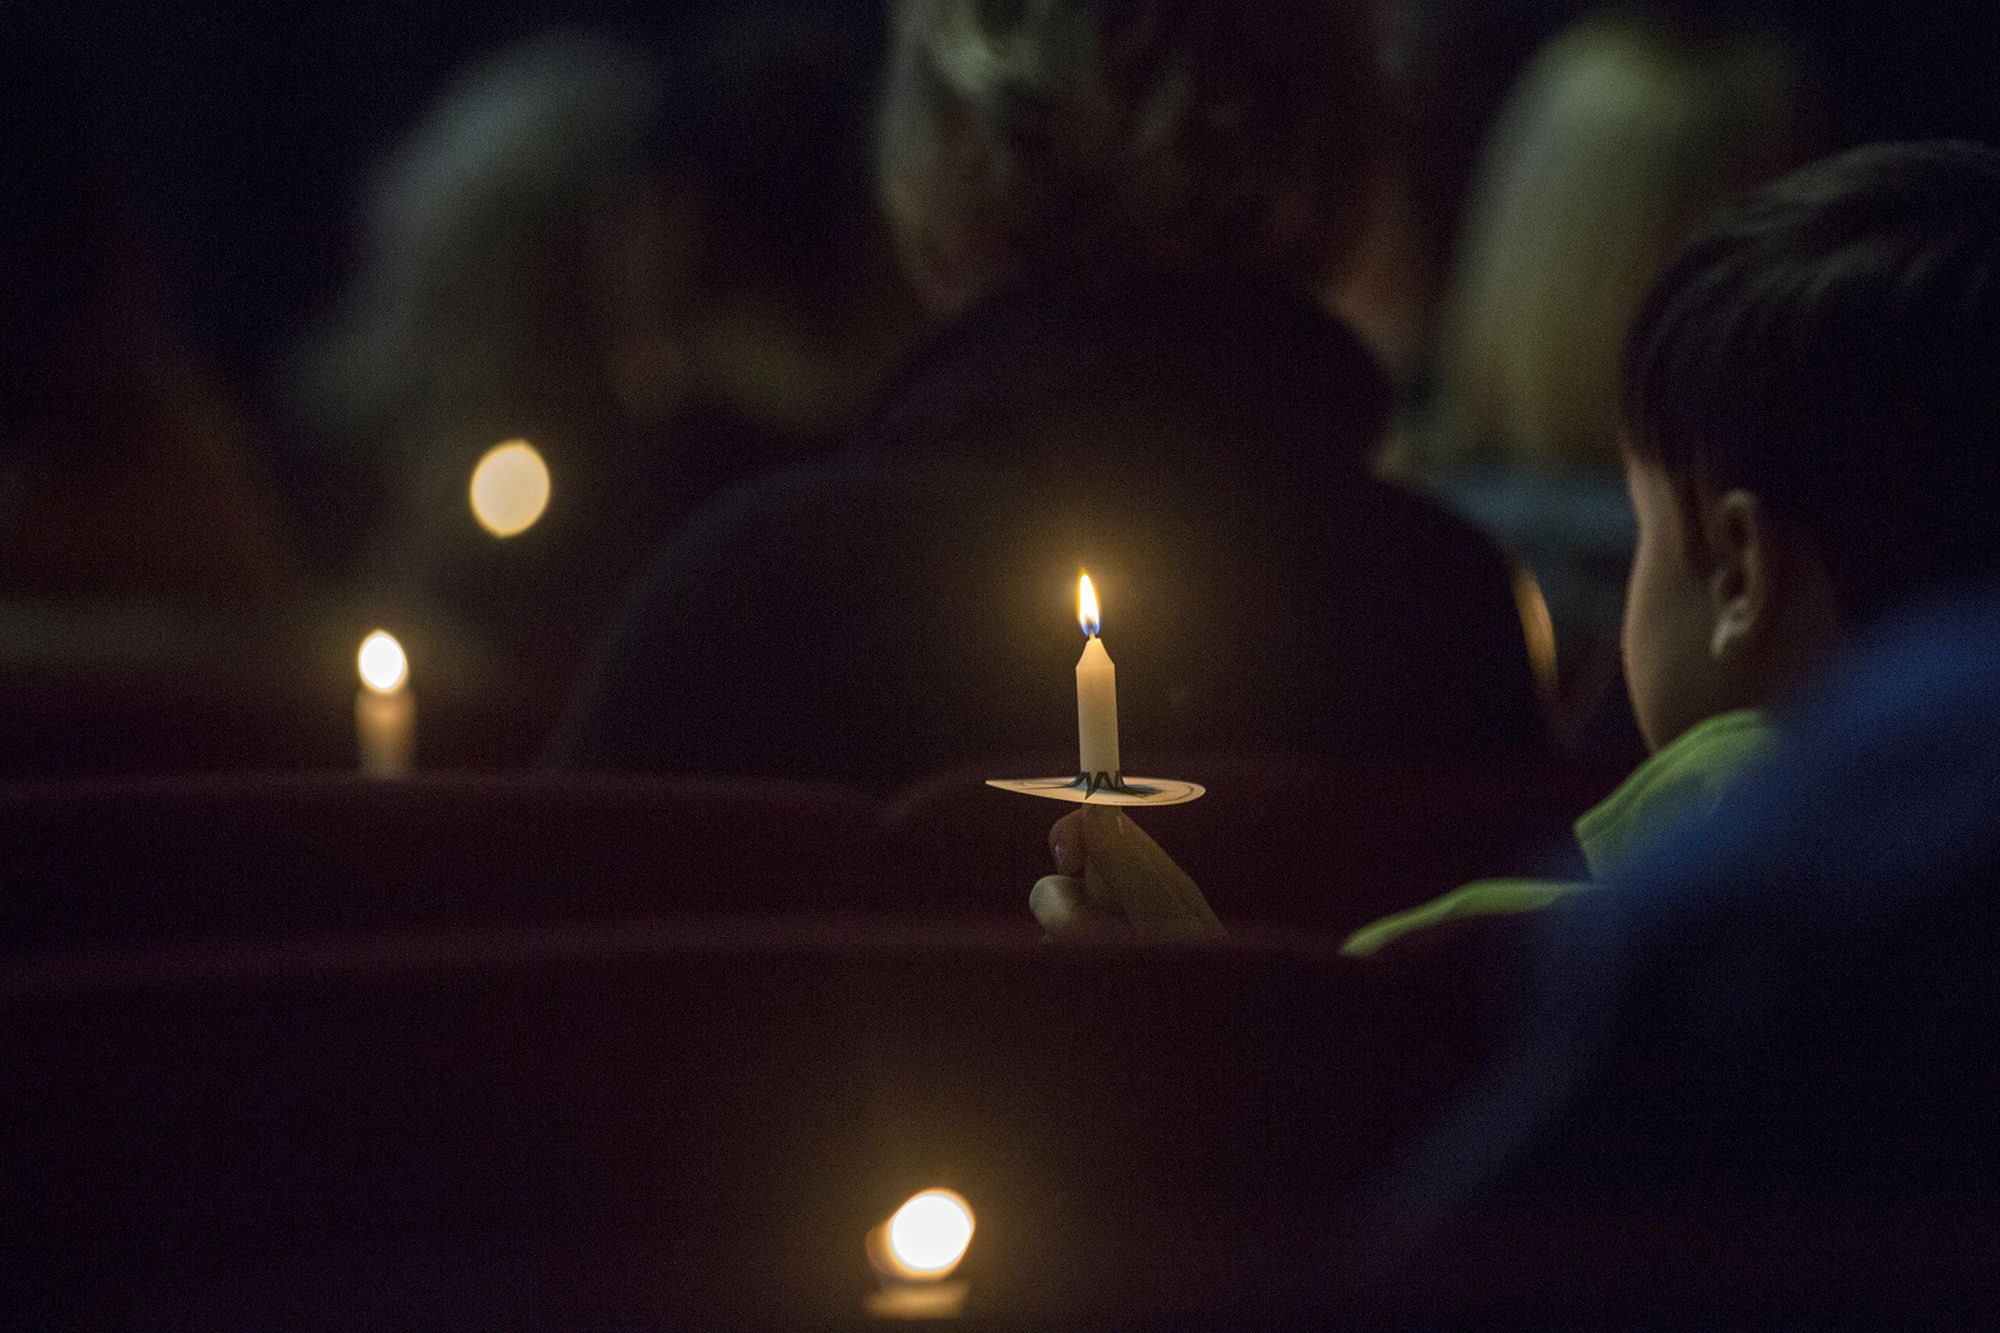 People hold candles during a vigil at Impact Church in Benton, Ky., Tuesday Jan. 23, 2018. The vigil was held for victims of the Marshall County High School shooting earlier in the day. (Ryan Hermens/The Paducah Sun via AP) SCHOOL SHOOTING-KENTUCKY